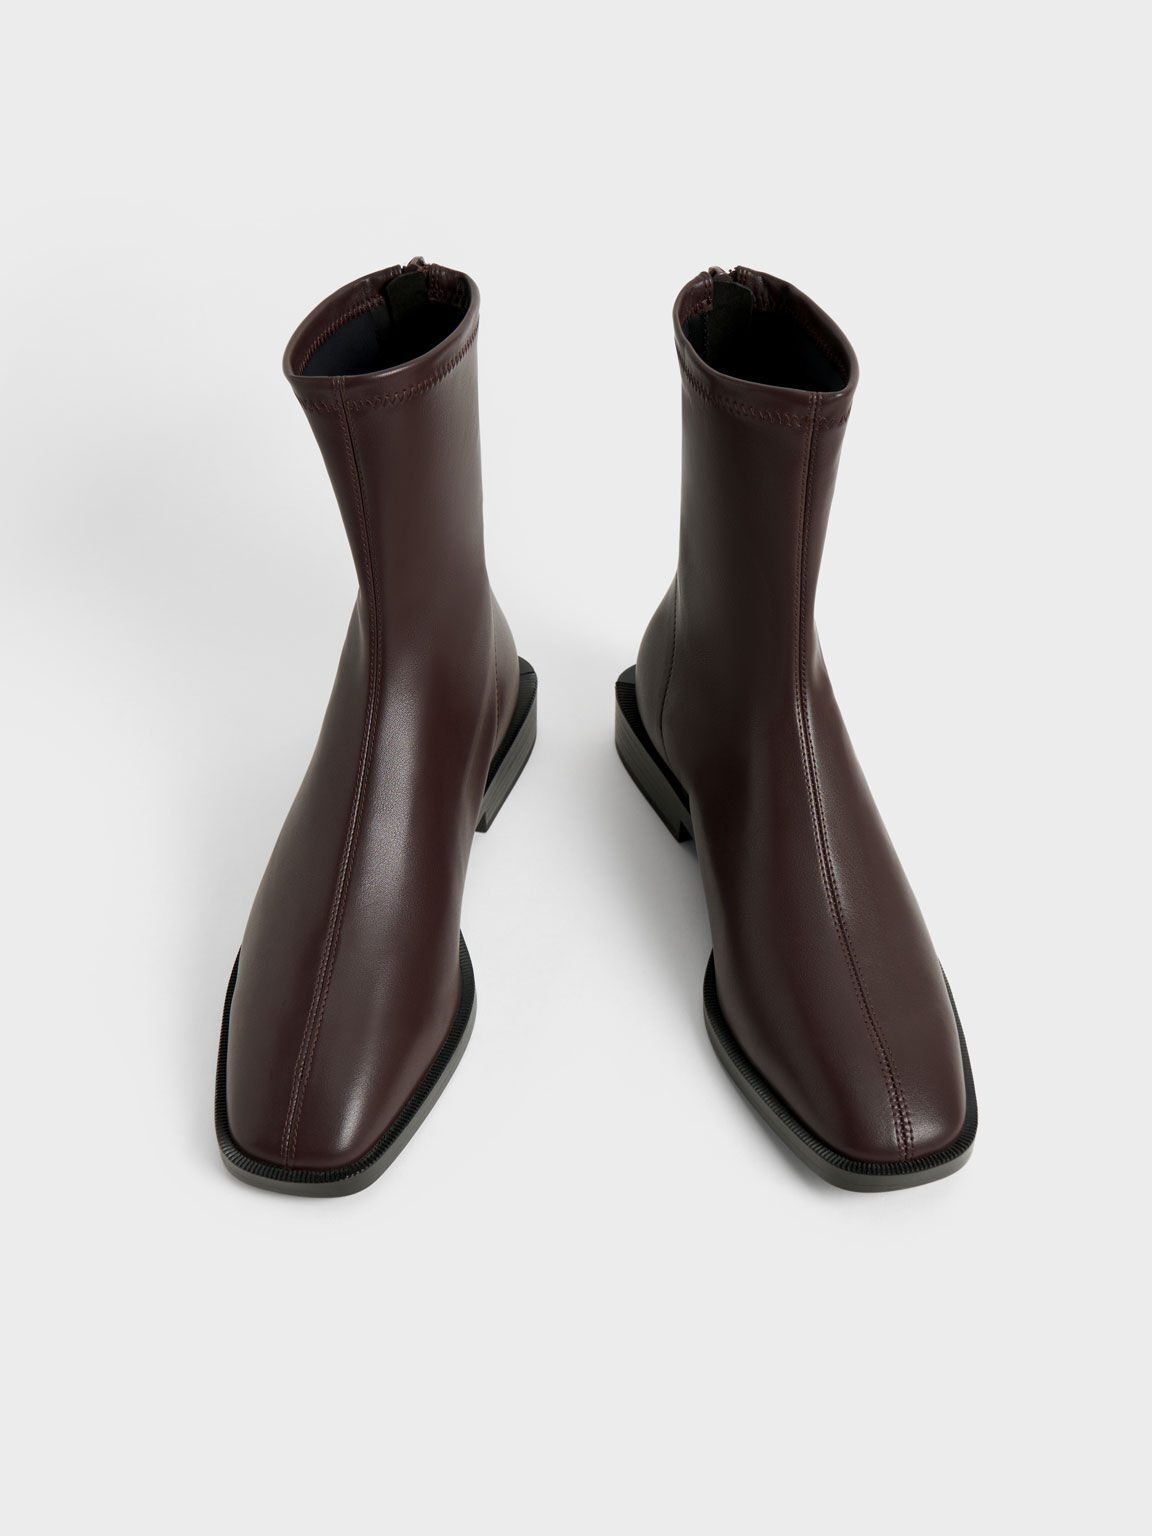 Square Toe Zip-Up Ankle Boots, Dark Brown, hi-res